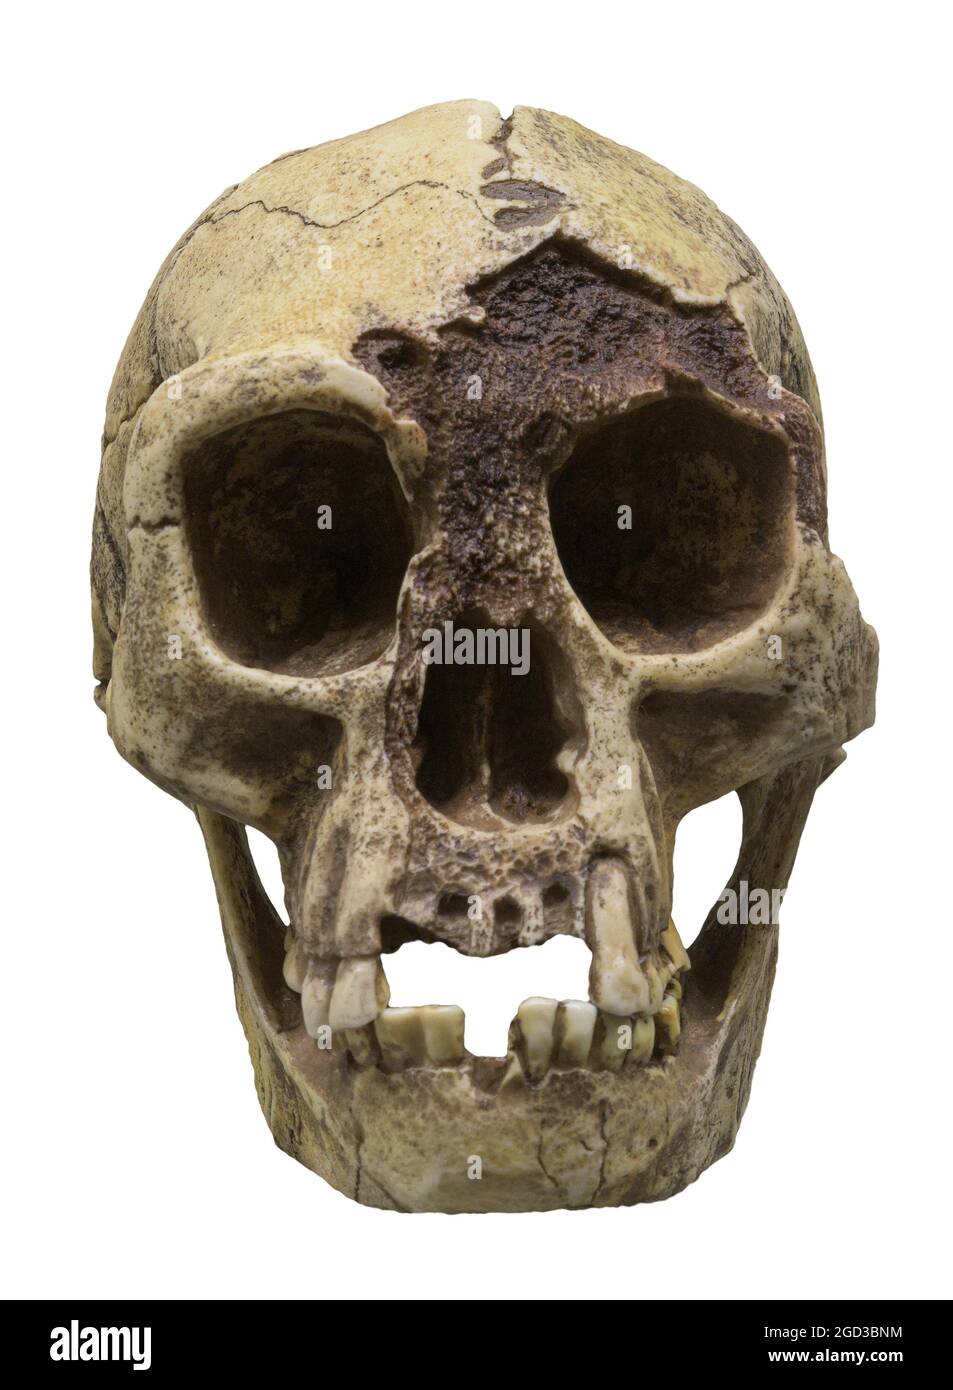 Skull of Homo floresiensis ('Flores Man'; nicknamed 'Hobbit') is a species of small archaic human that inhabited the island of Flores, Indonesia Stock Photo